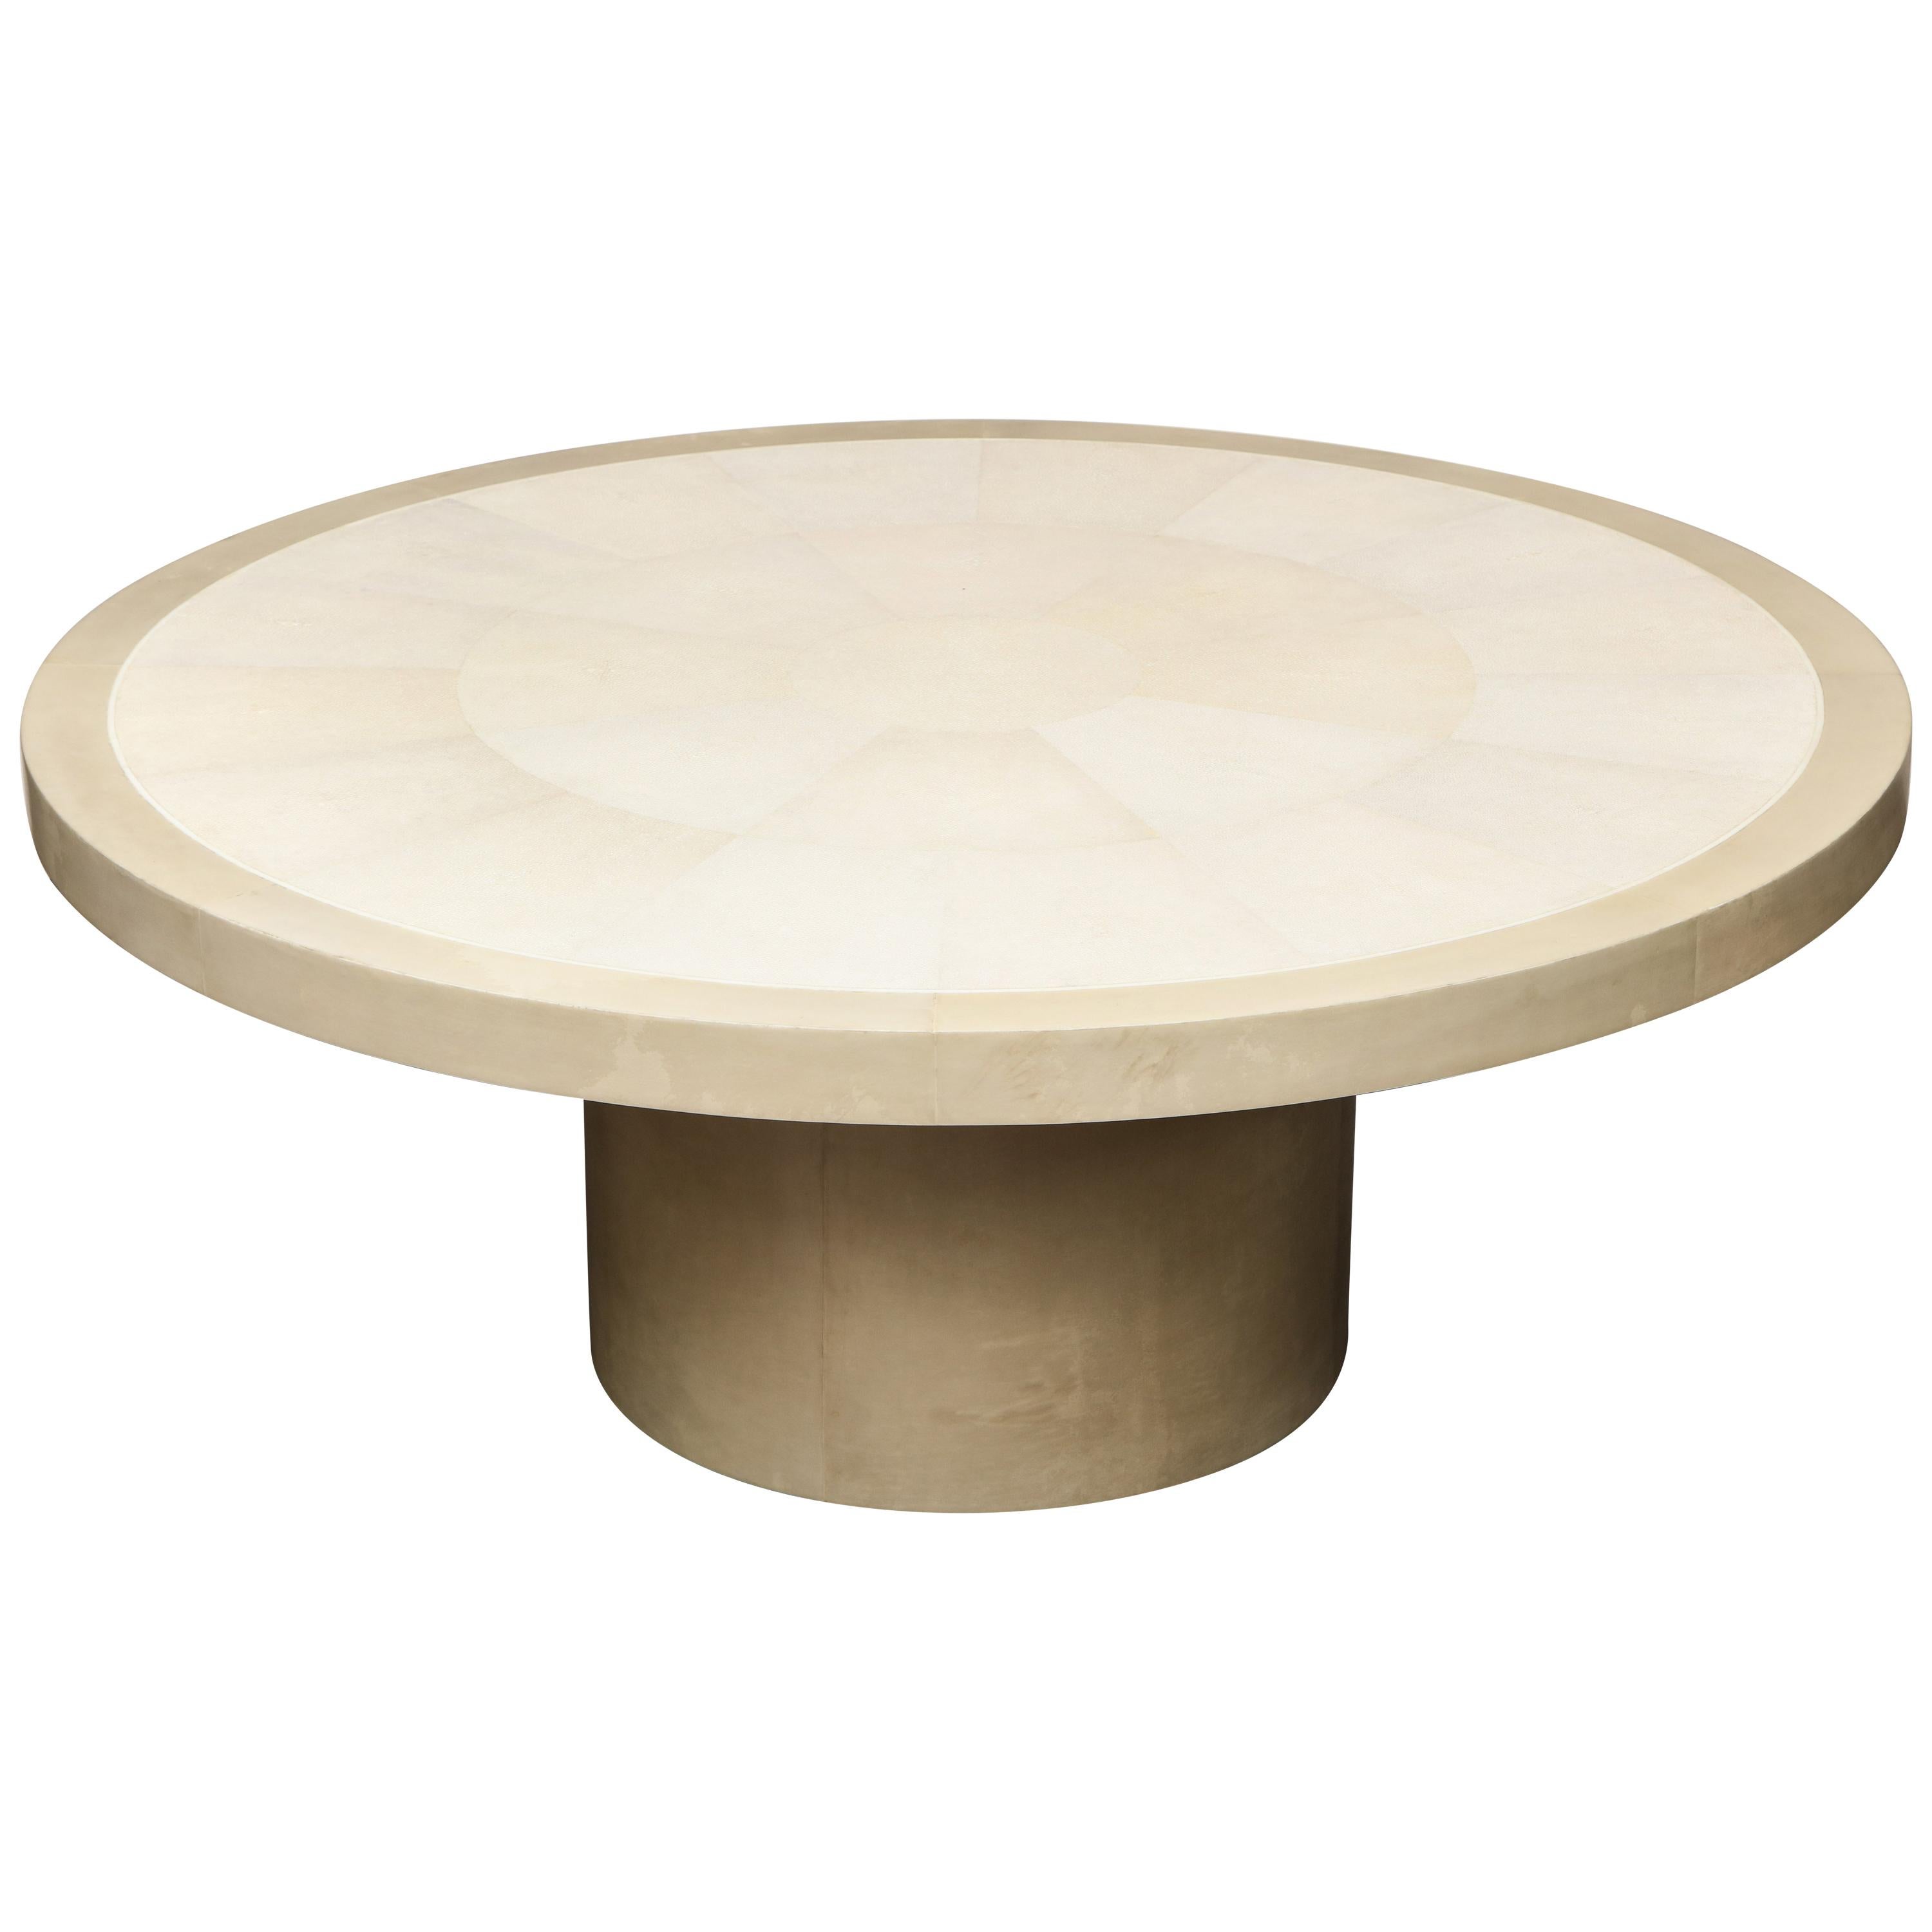 Round Genuine Shagreen Table with Bone Trim and Parchment Base 